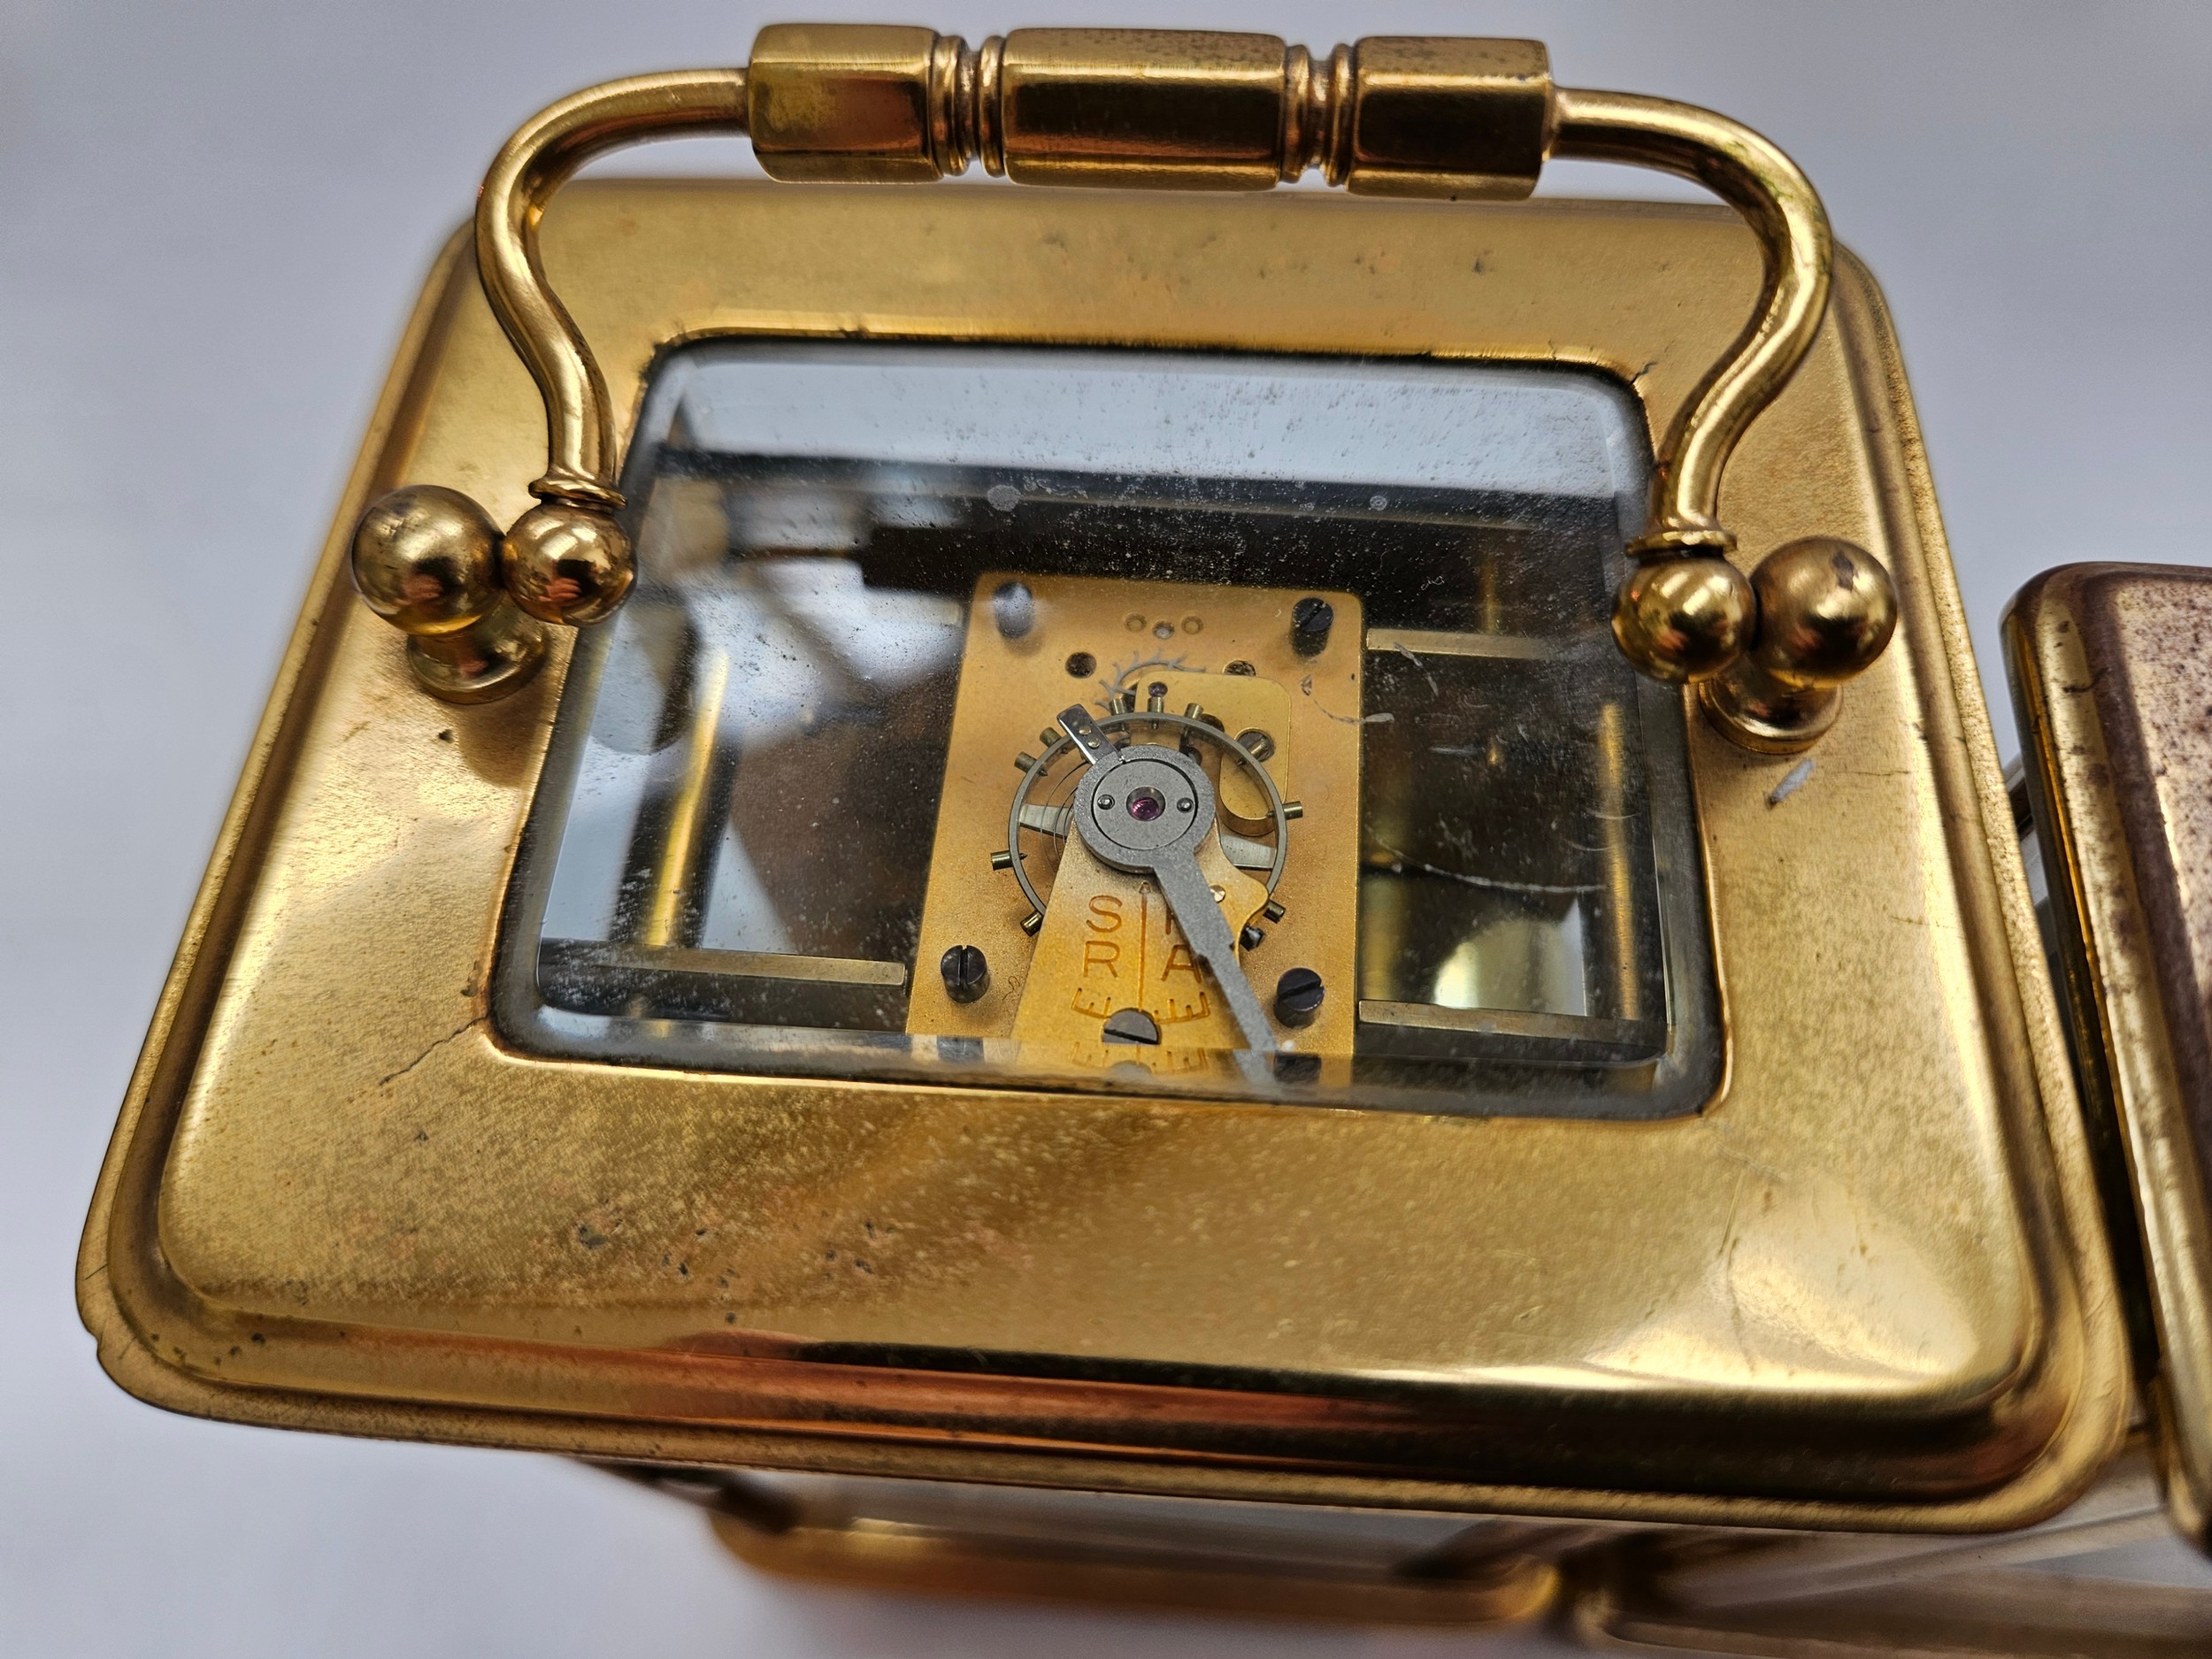 A Schatz 8-day carriage timepiece with pin pallet escapement, with another carriage timepiece with - Image 2 of 6